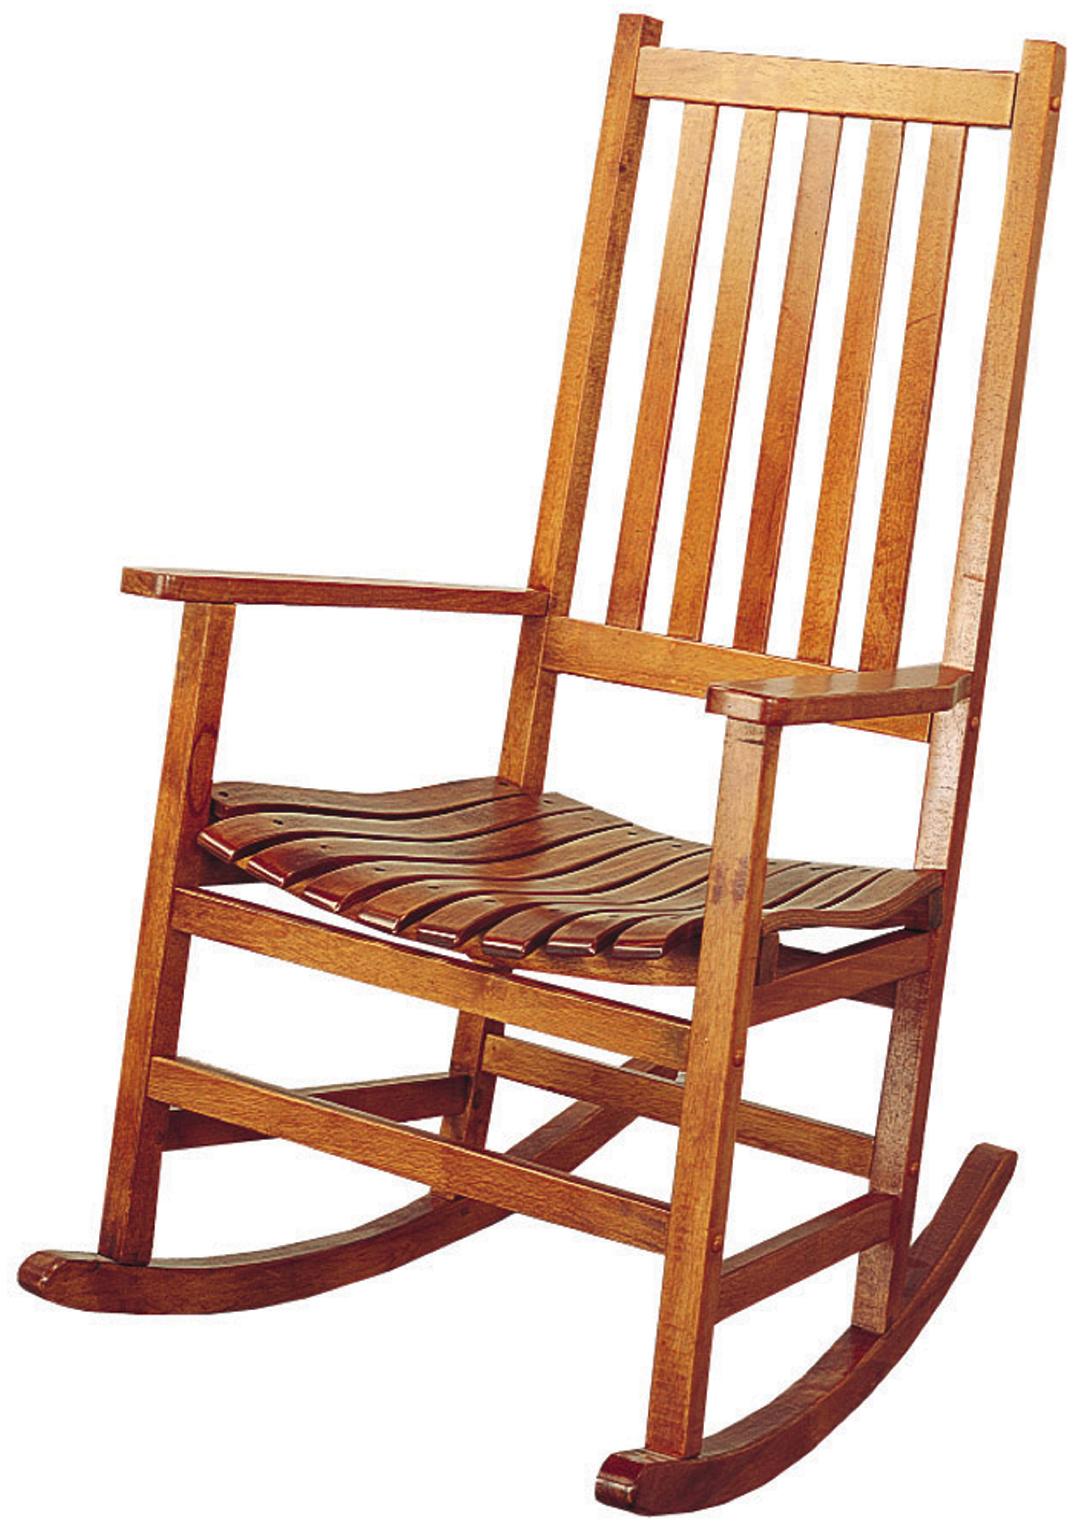 Rocking Chair Clipart | Free download best Rocking Chair ...
